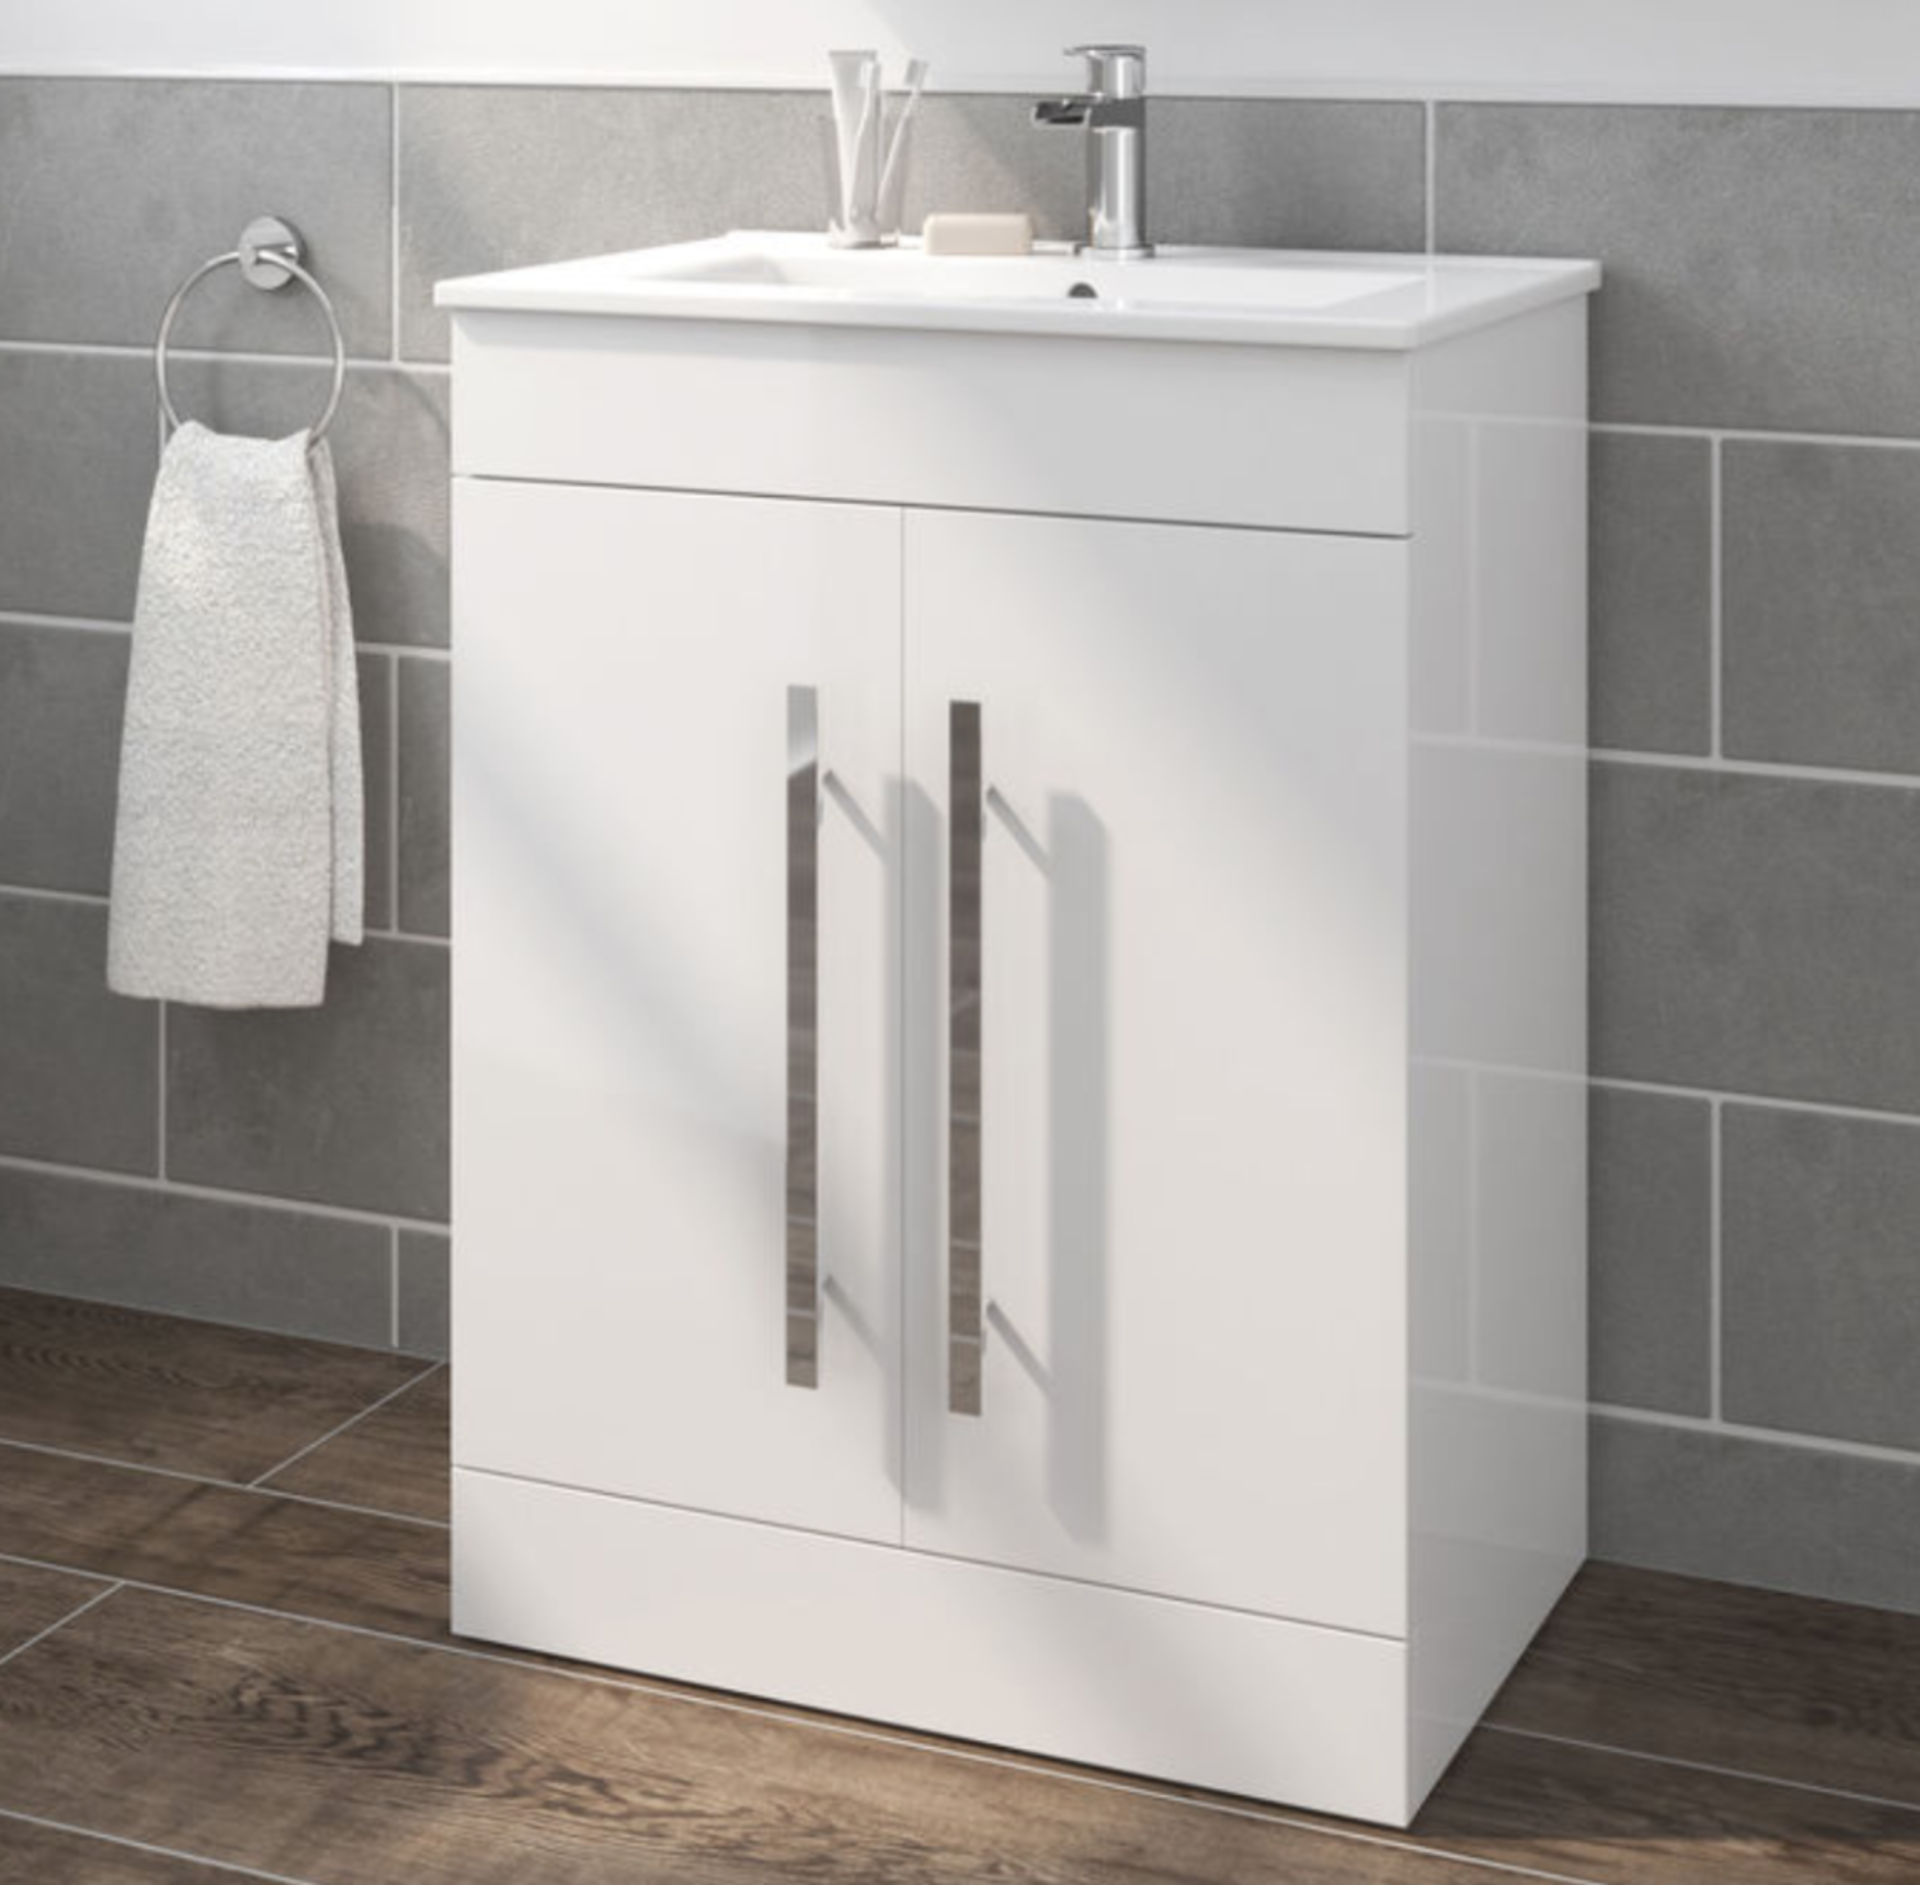 New Boxed 600mm Trent Gloss White Sink Cabinet - Floor Standing. RRP £499.99.Comes Complete With